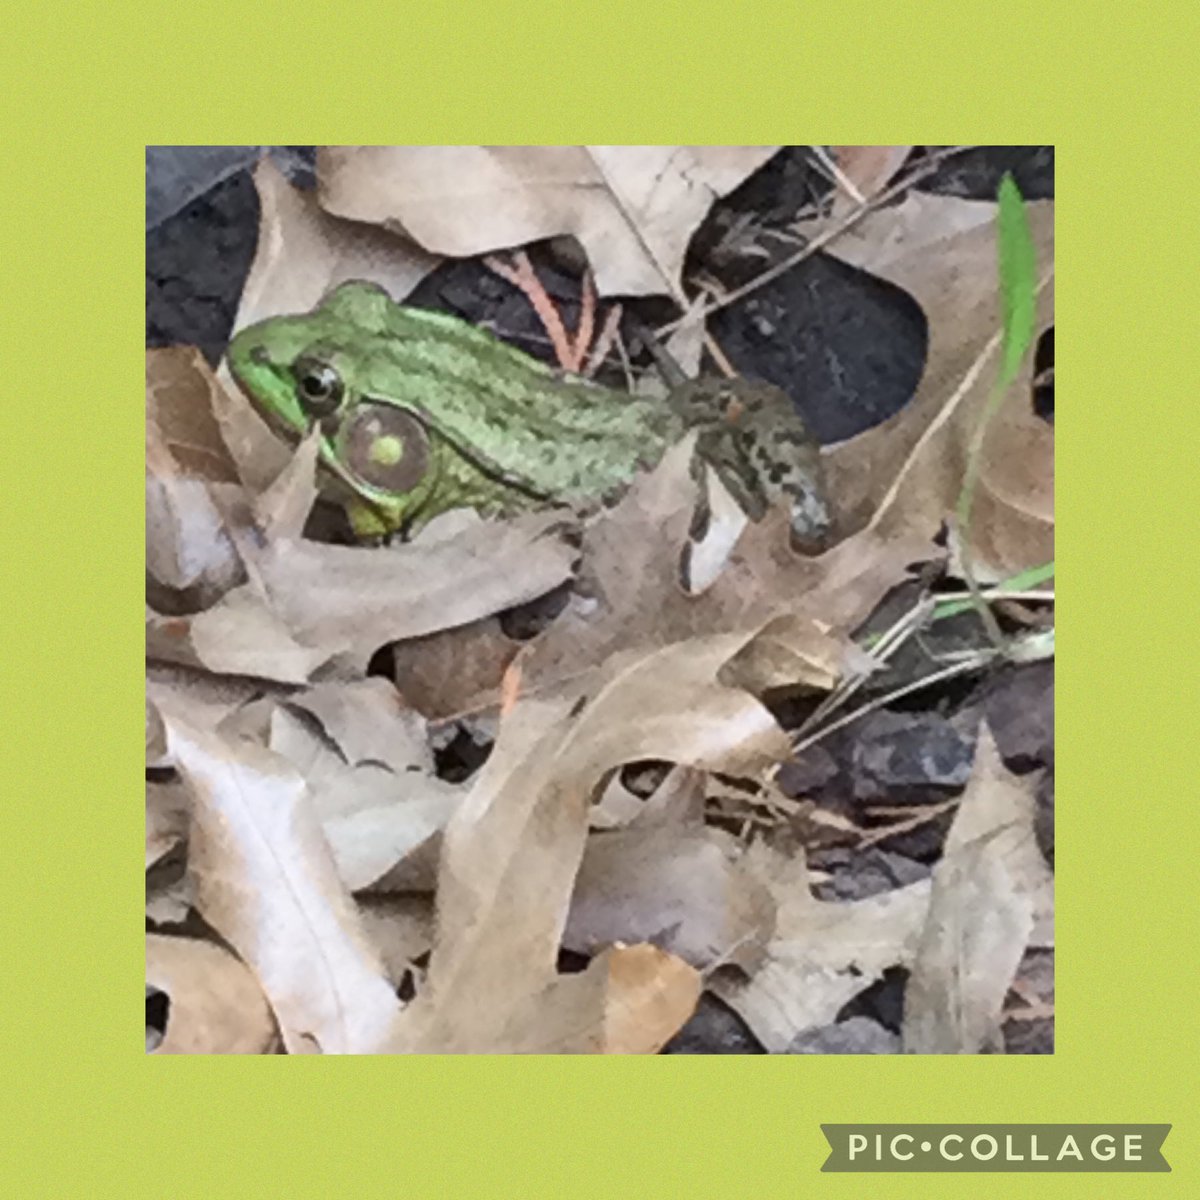 Look who has come to our backyard habitat! Why is he here? Will he stay? This is an amazing development as we explore the needs of living things!
⁦@Hampton_Street⁩ #mineolaproud #steamchallenge #classroomwithoutwalls